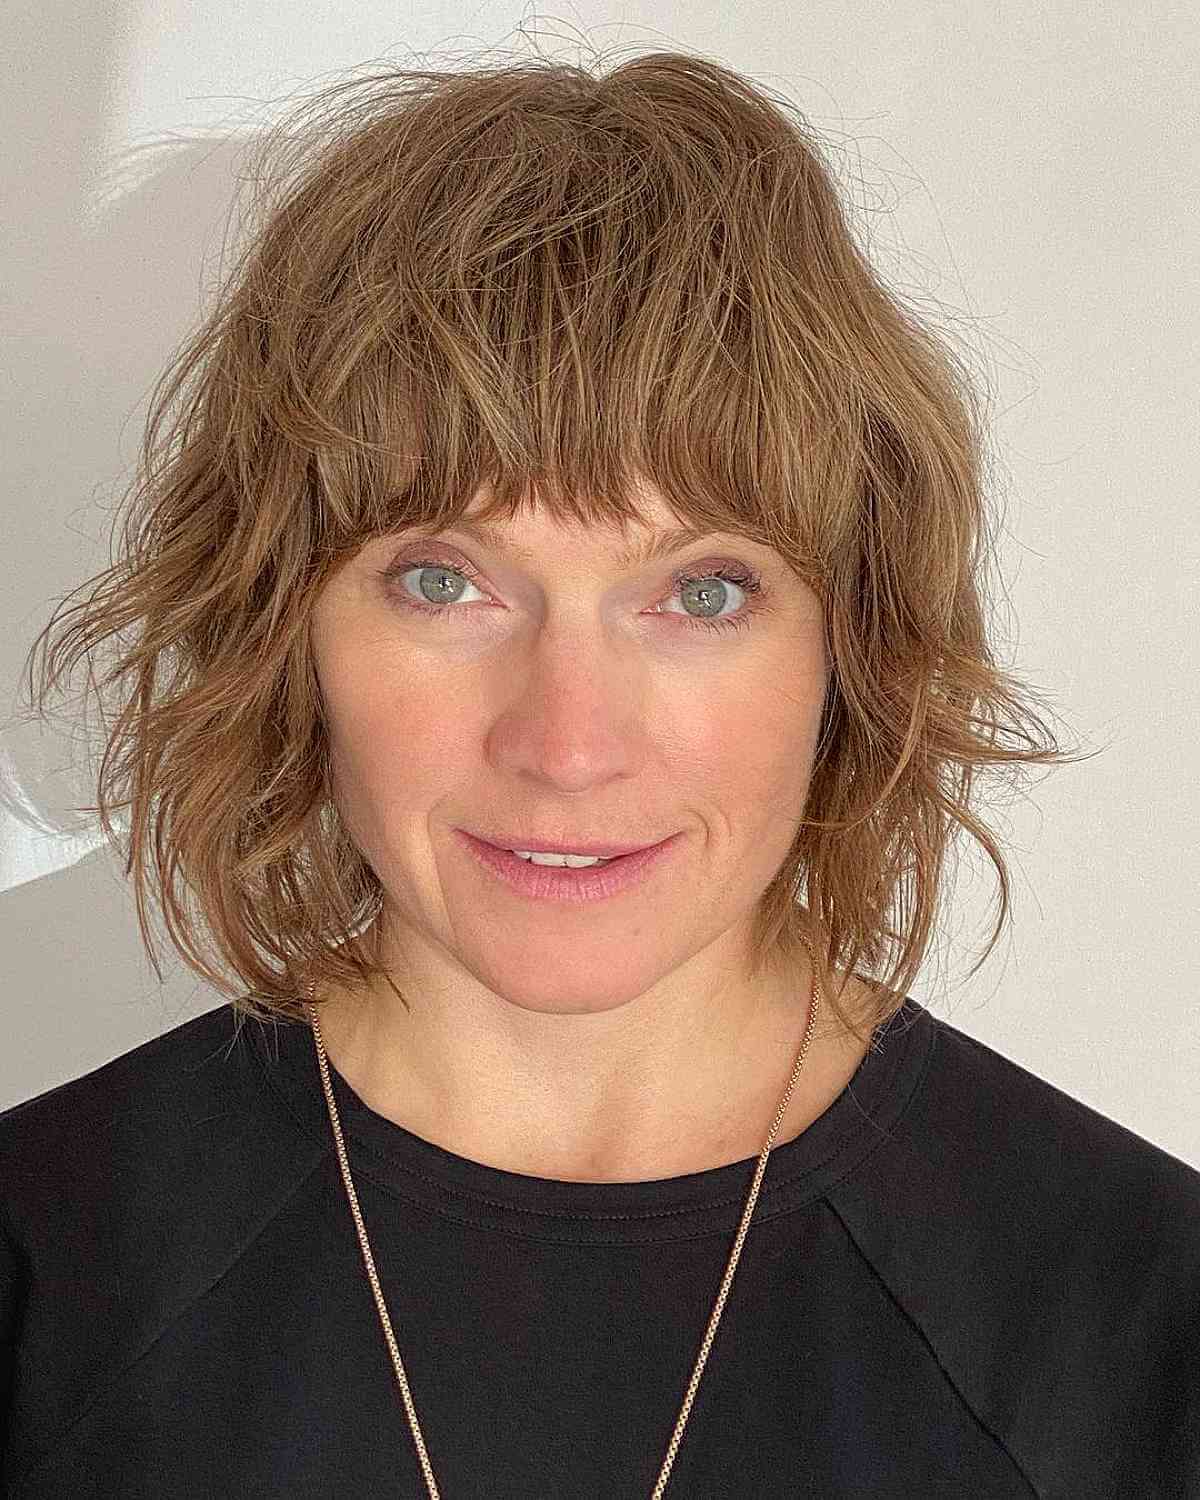 Chin length cut with tousled layers and bangs